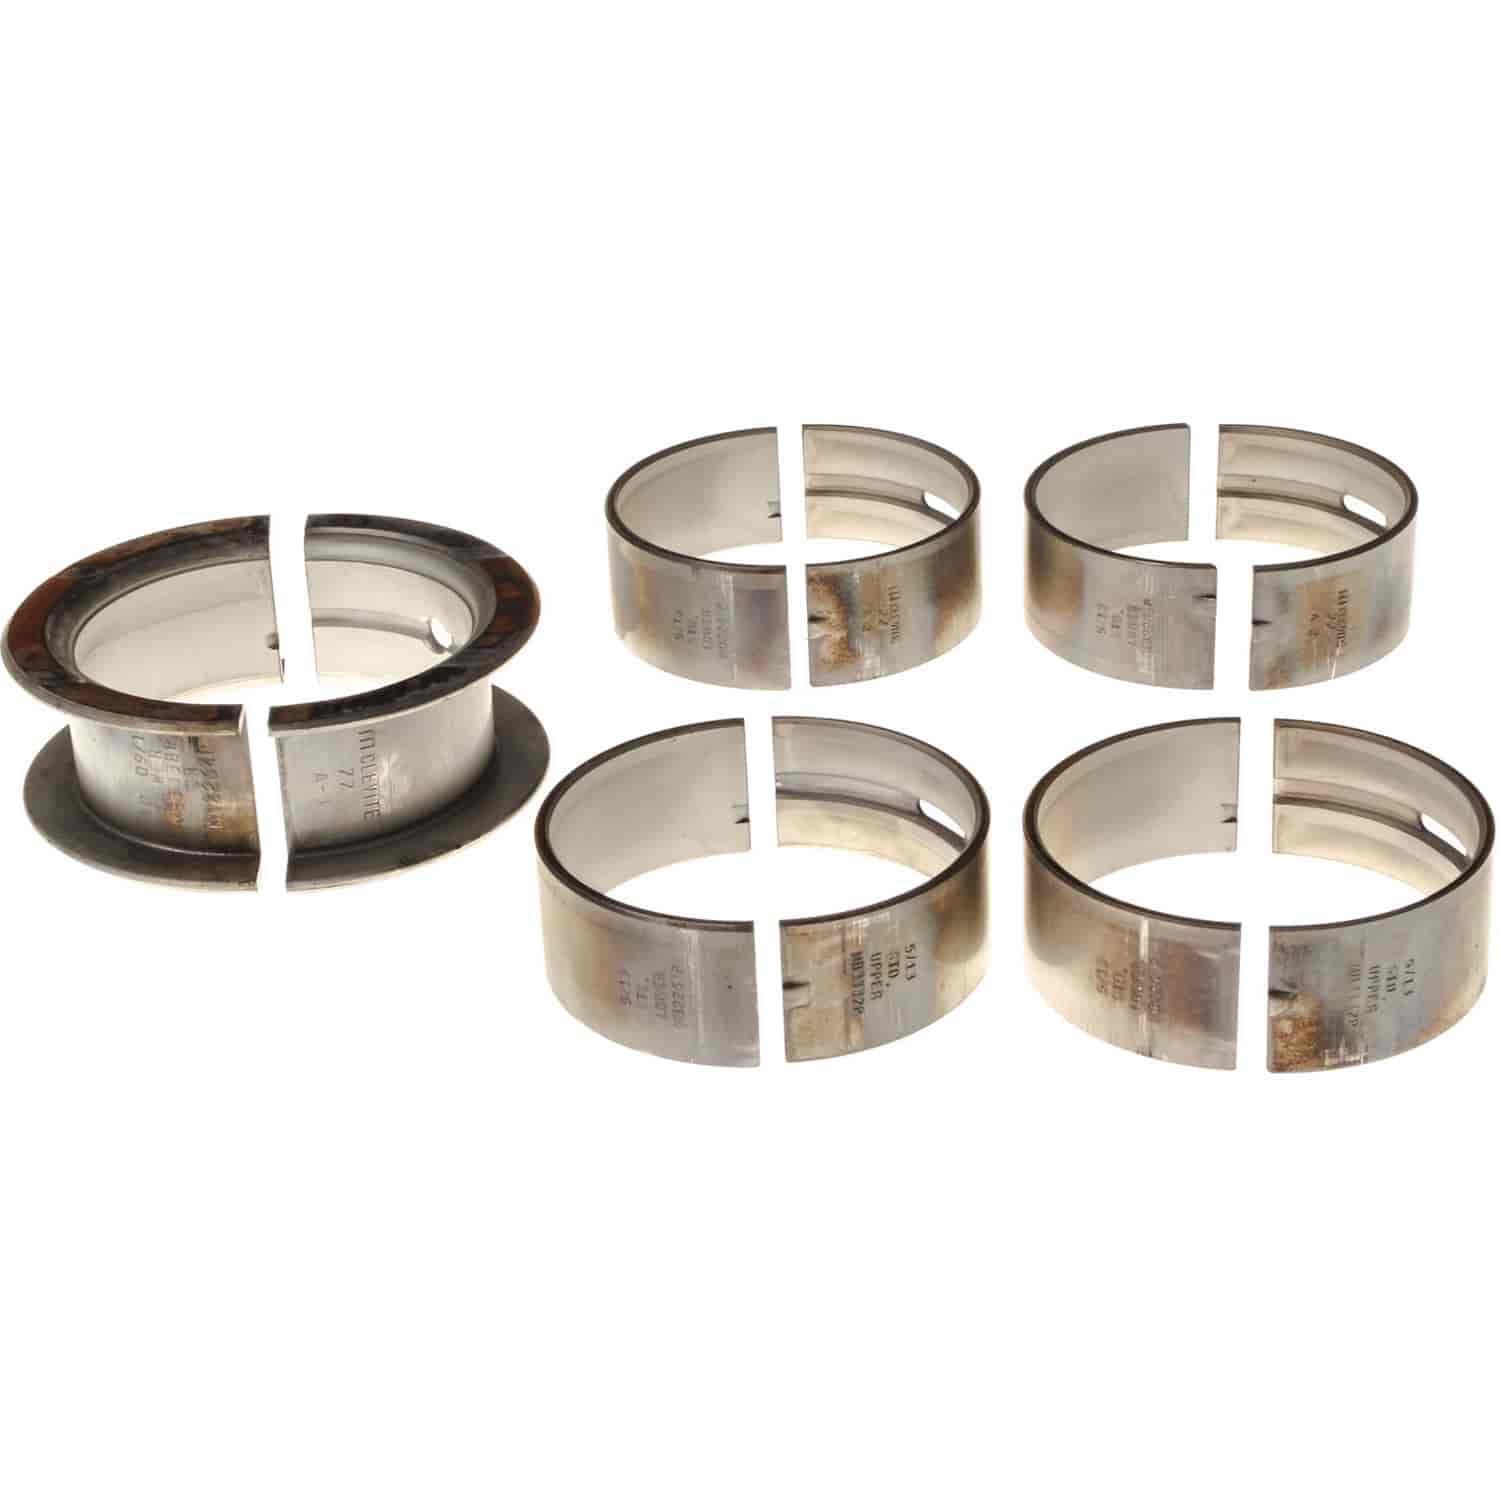 Main Bearing Set Chrysler/Jeep 1991-2002 L4 2.5L with -.030" Undersize